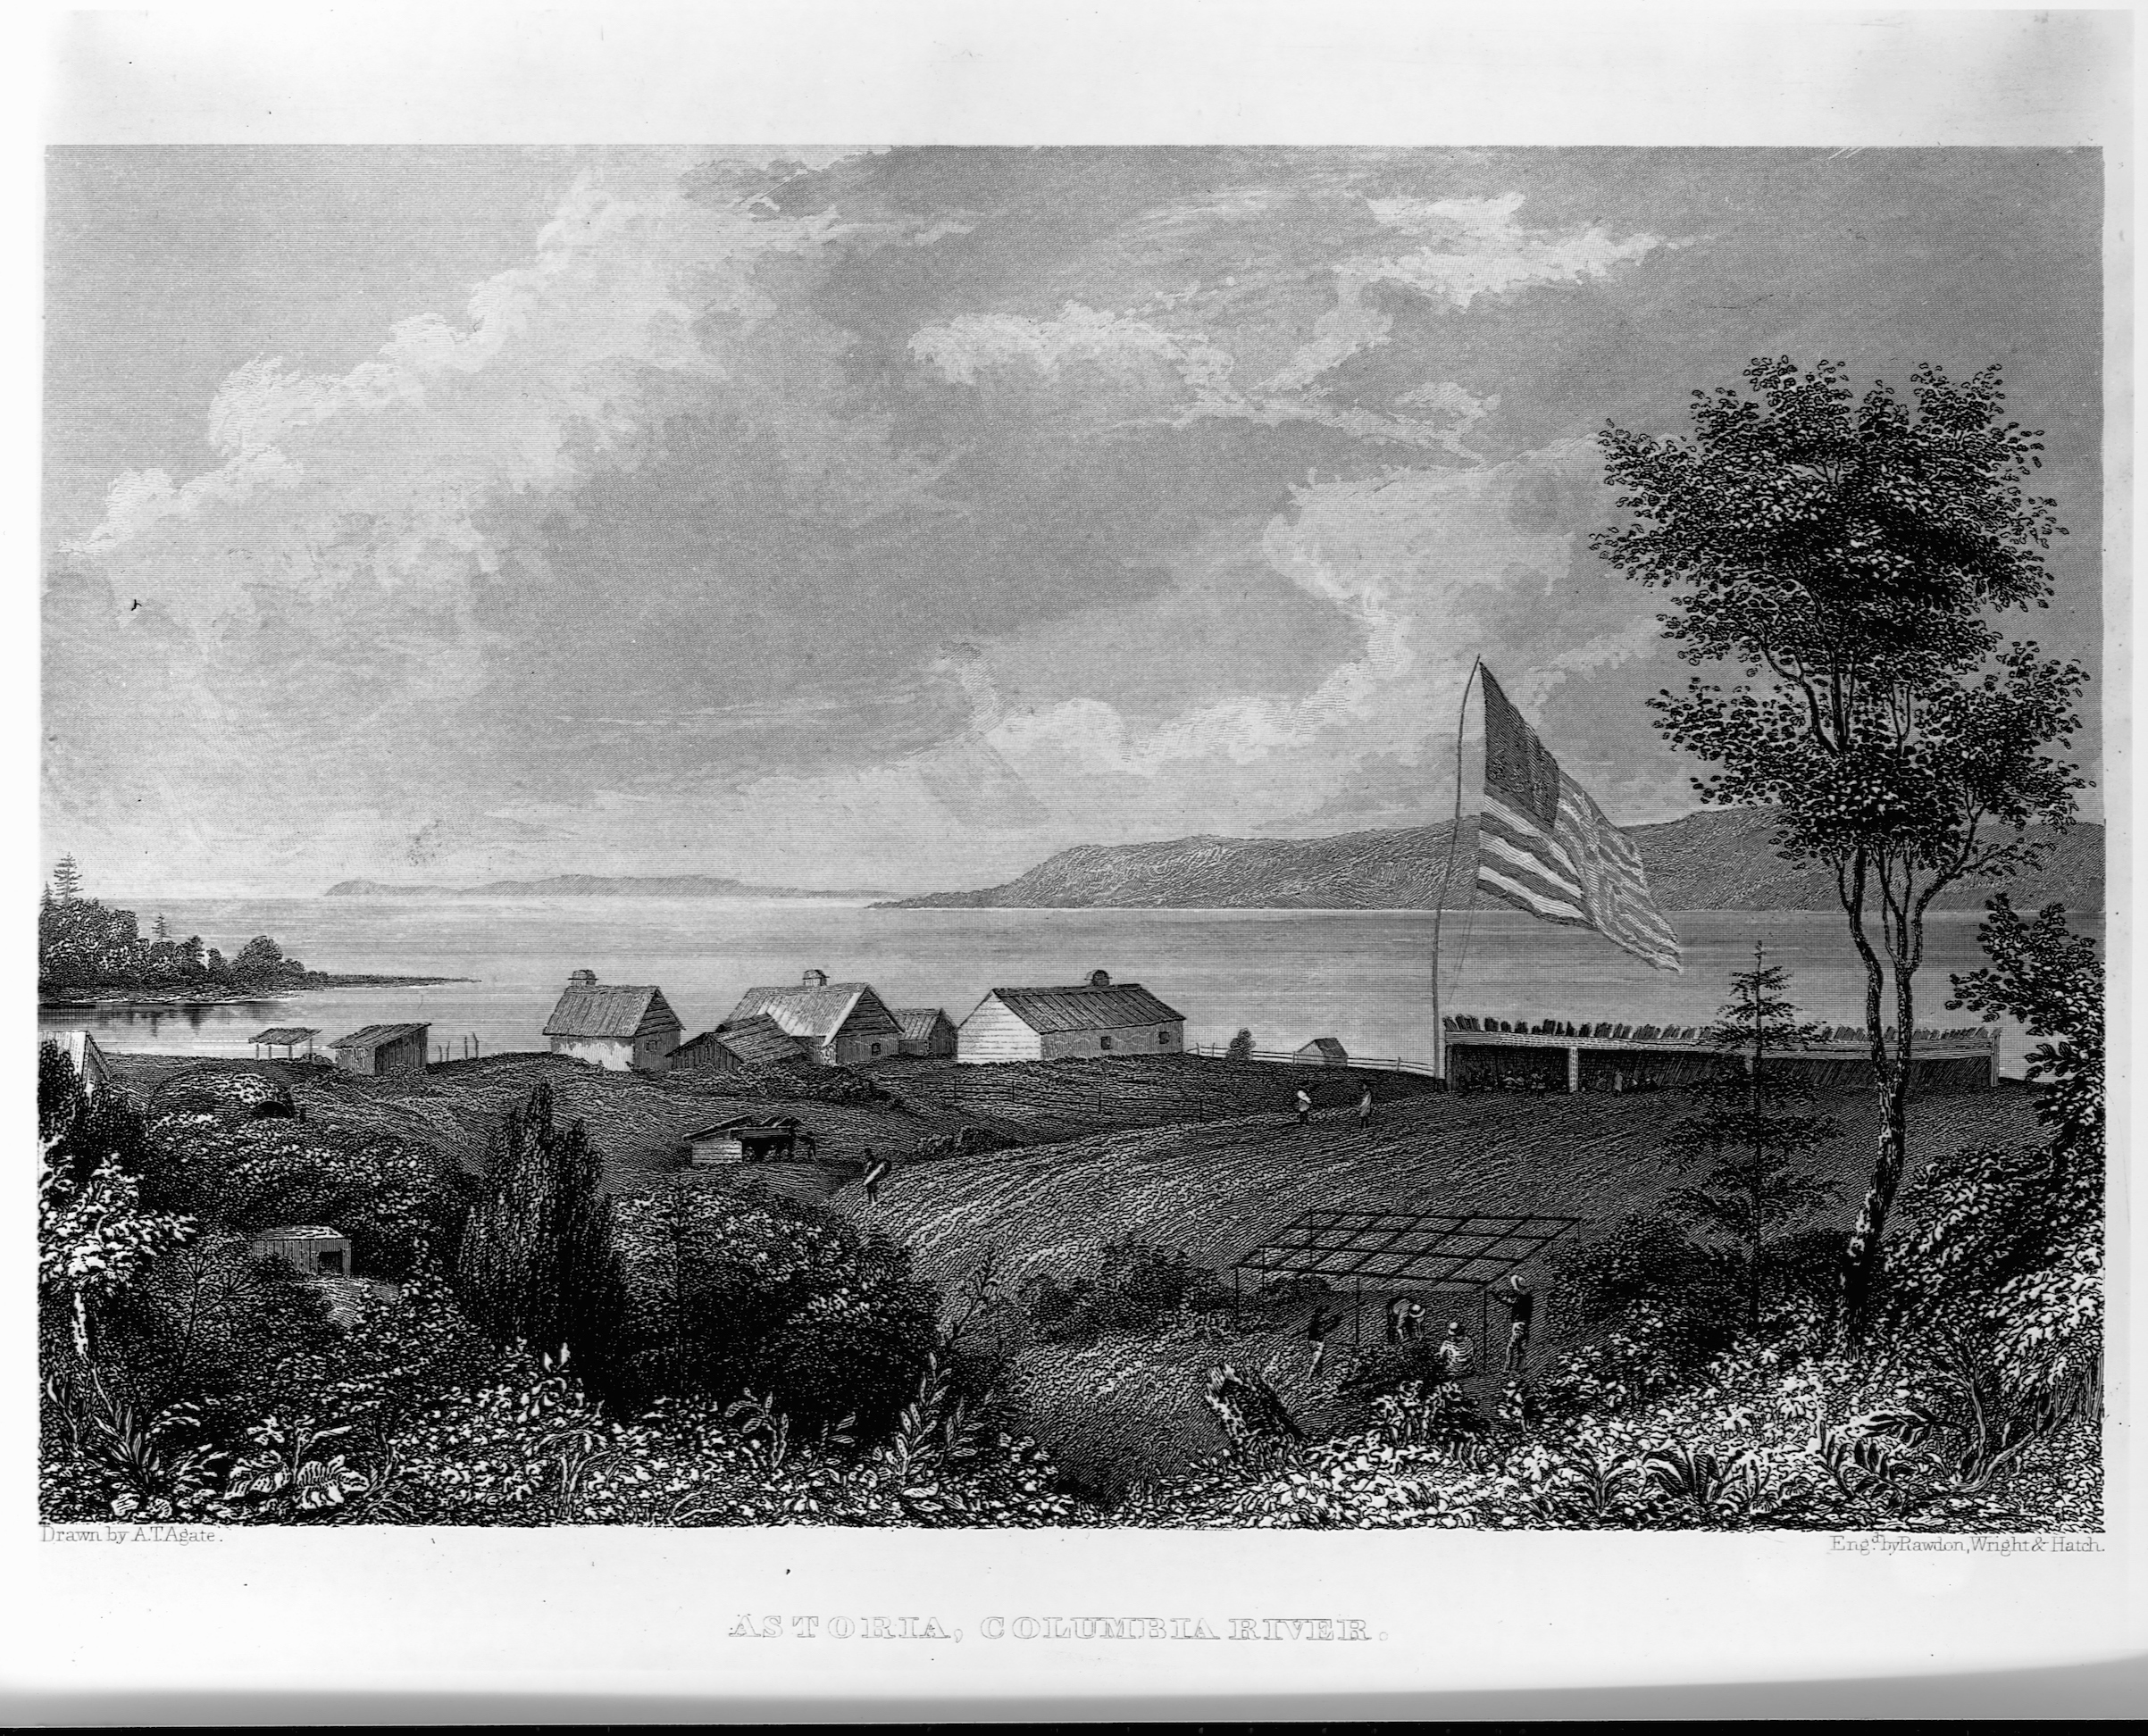 The small settlement of Astoria, Oregon, on the Columbia River, in the 1840s shortly after it was returned to U.S. control from the British, in an engraving appearing in Charles Wilkes' Narrative of the United States Exploring Expedition. (Library of Congress/Corbis/VCG via Getty Images)